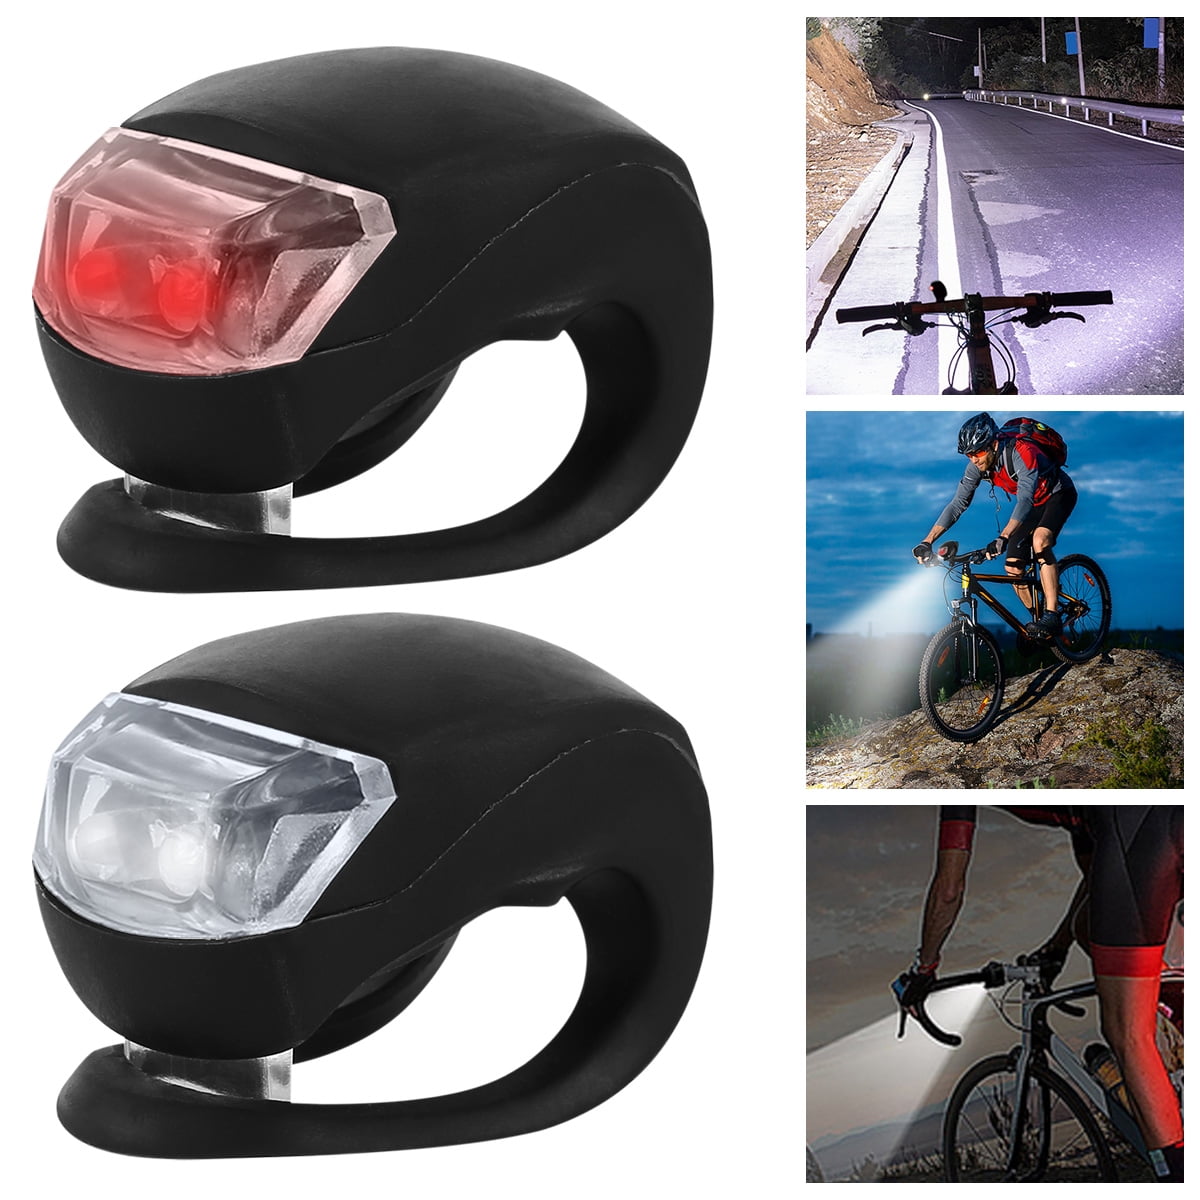 Black Bicycle Headlight with White and Red LEDs 